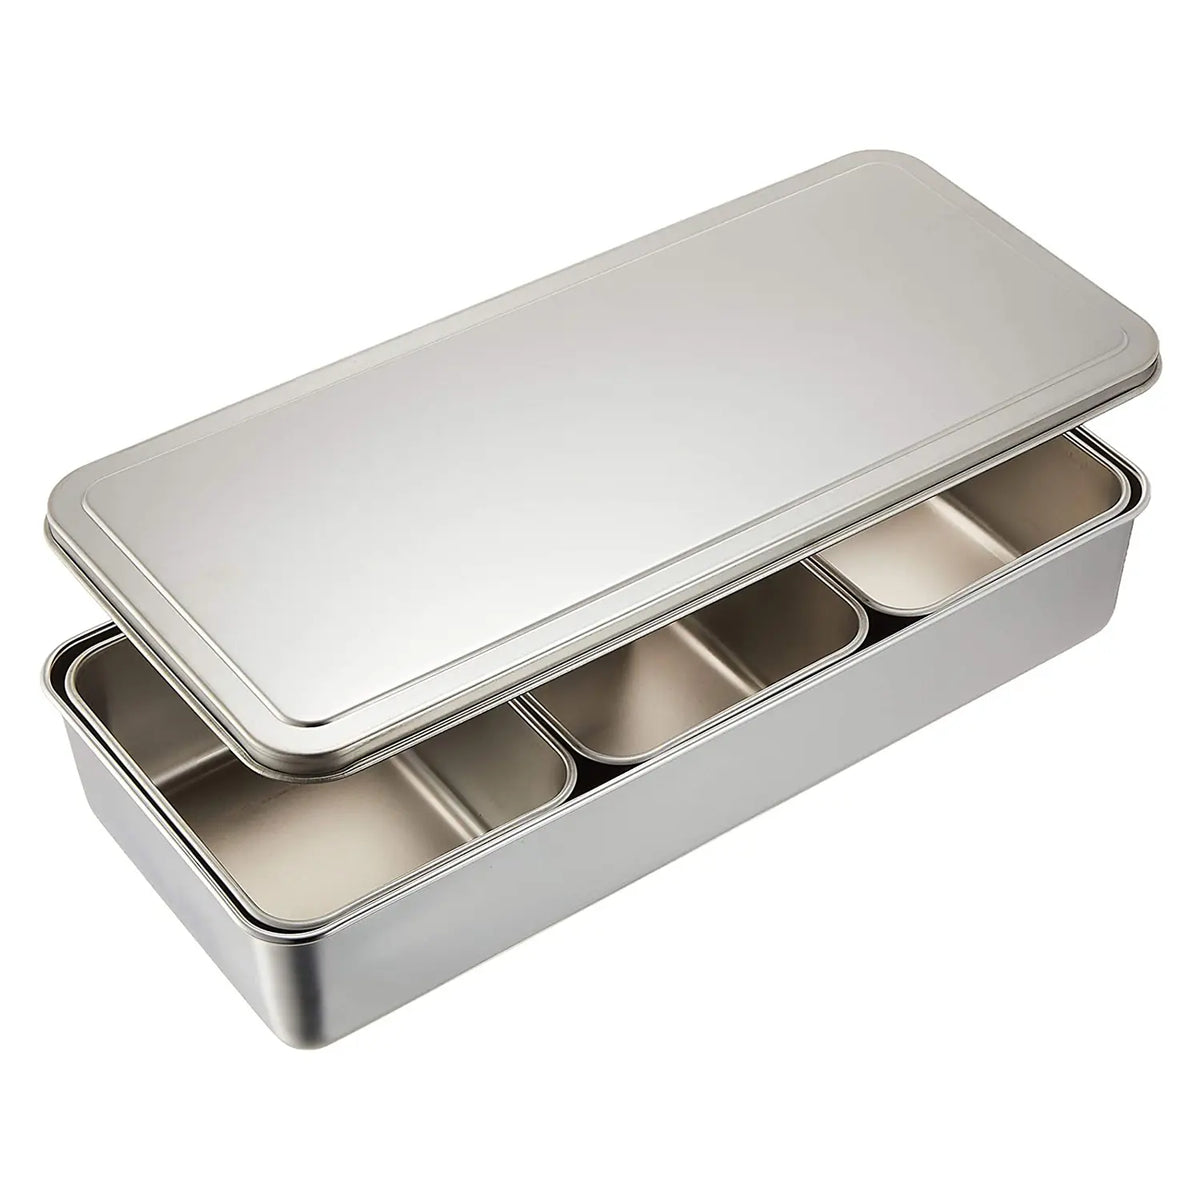 Xarra - Japanese Mini Container, Stainless Steel Yakumi Mise En Place Box,  Multi Compartment Set For Food, Herbs, Seasoning and Spices (6 Compartment)